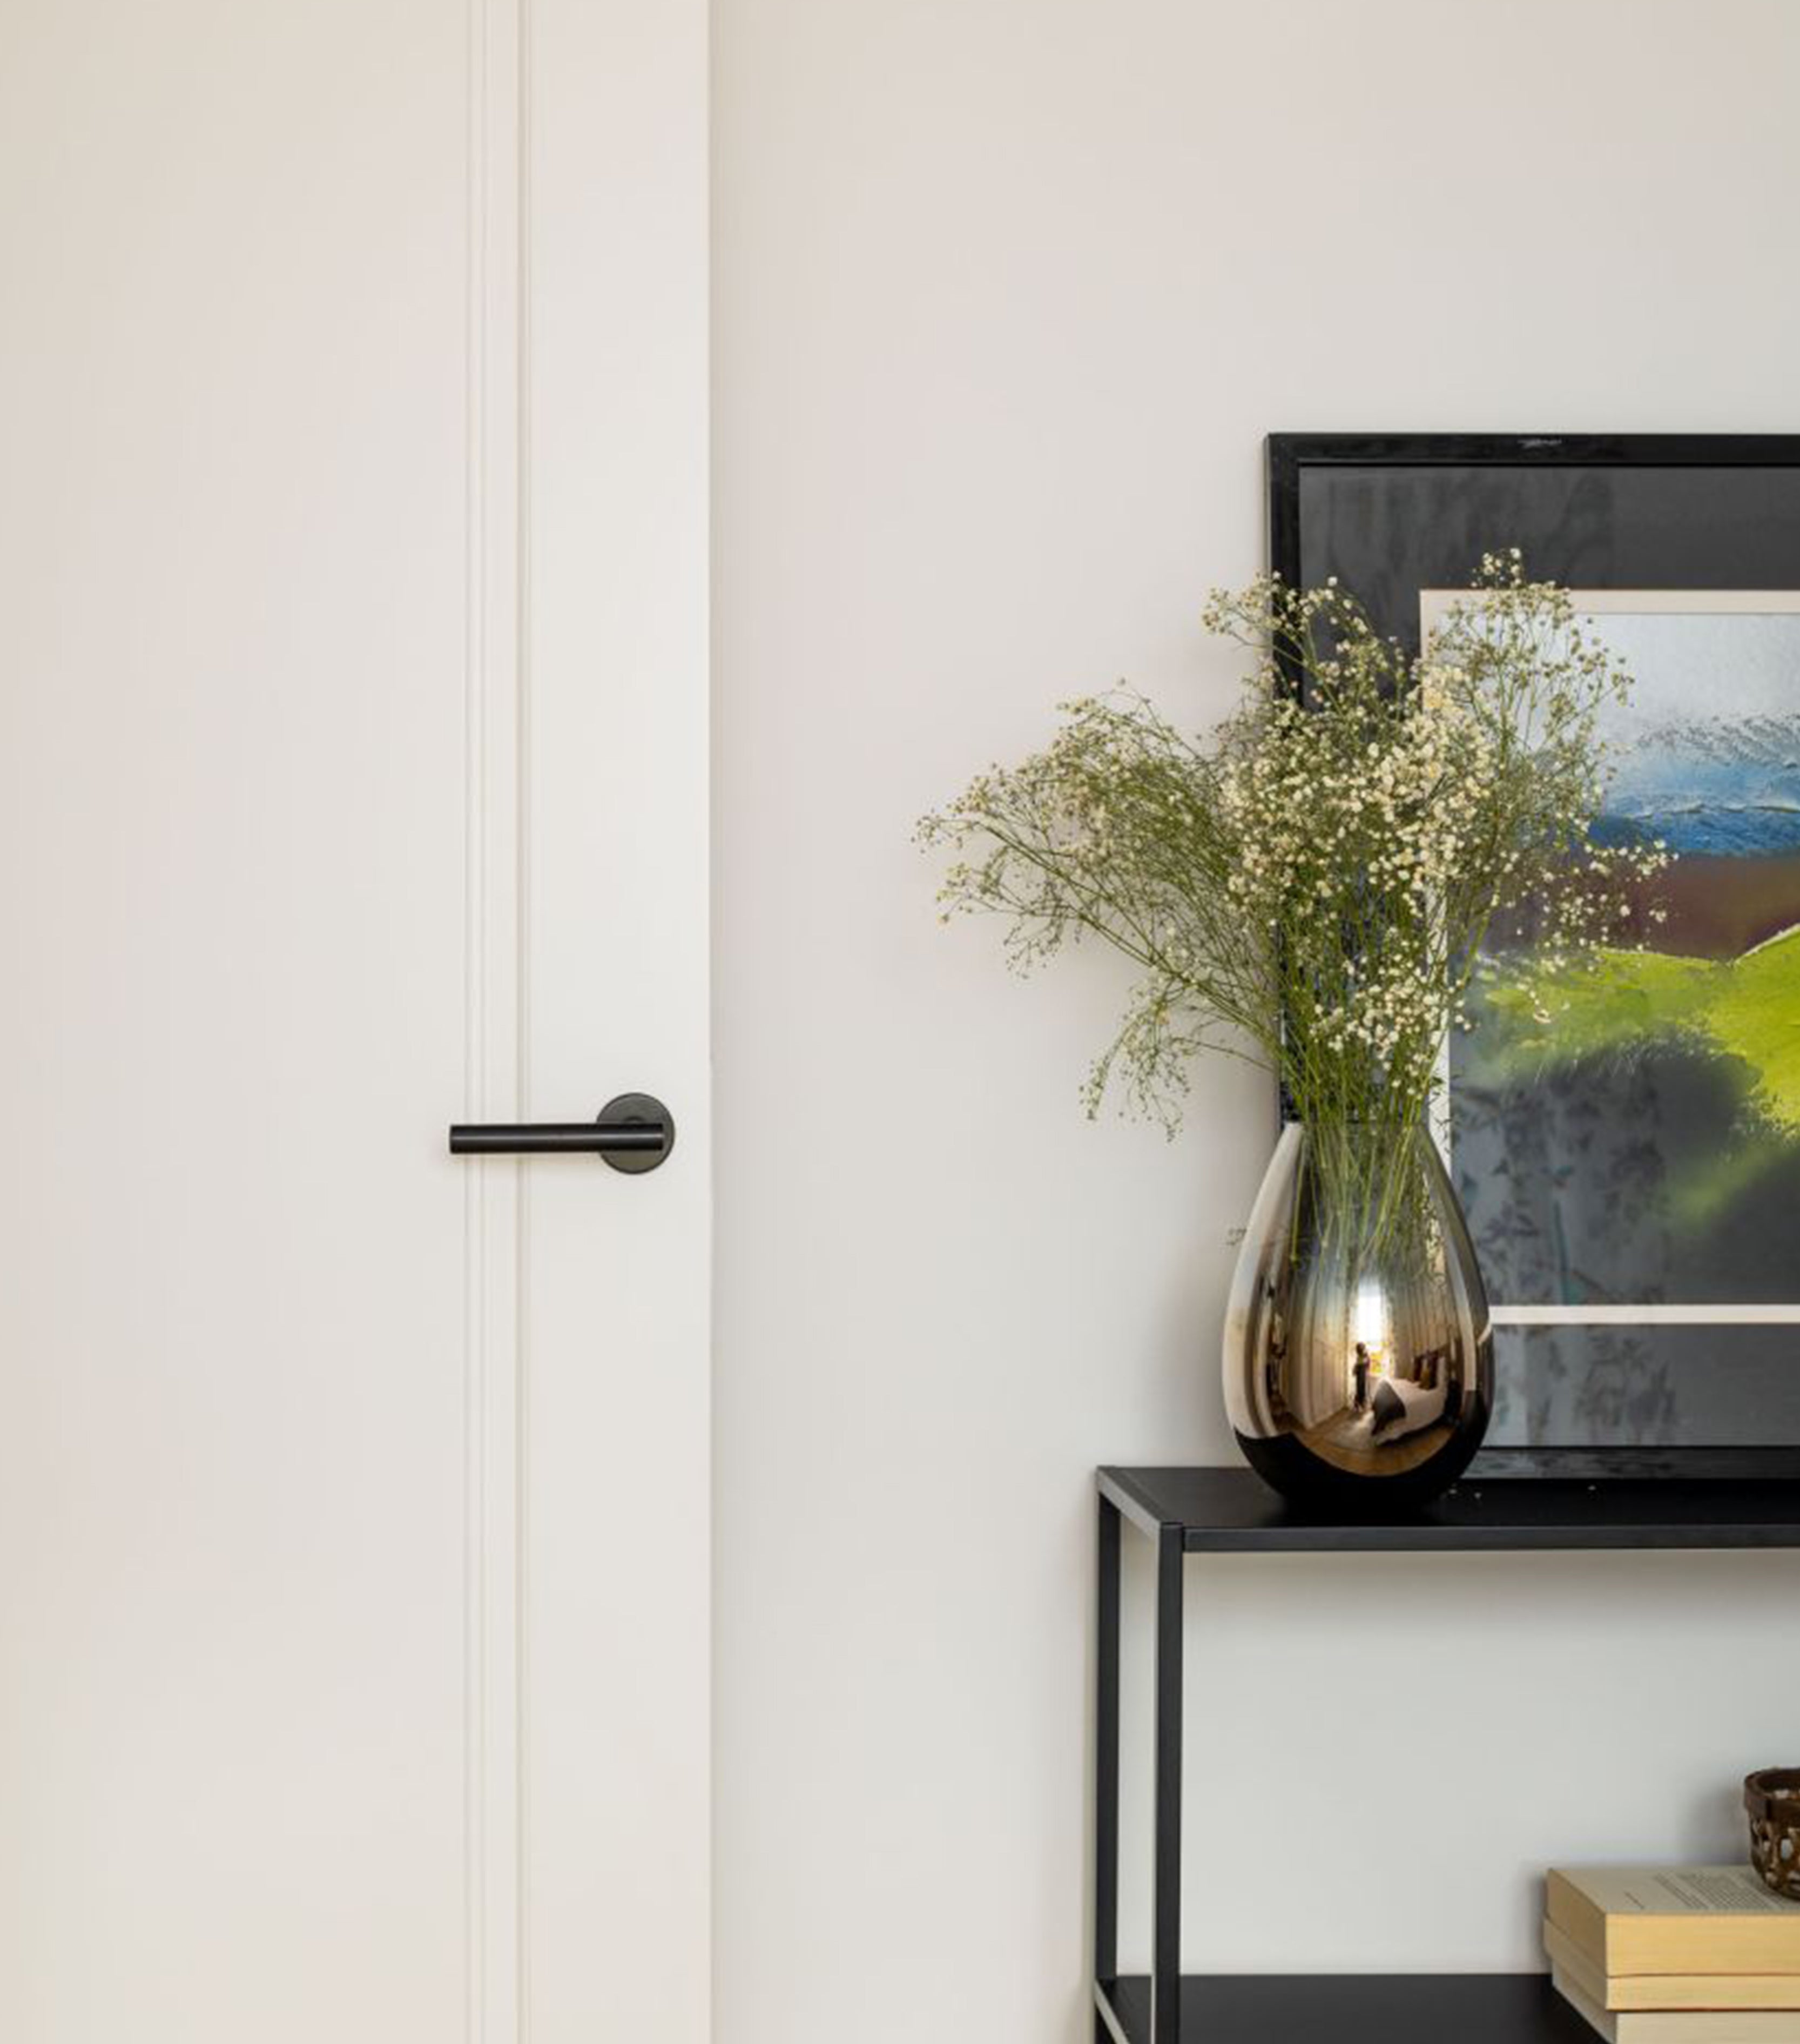 Image of white door with black passage door handle lever and console with vase and plants